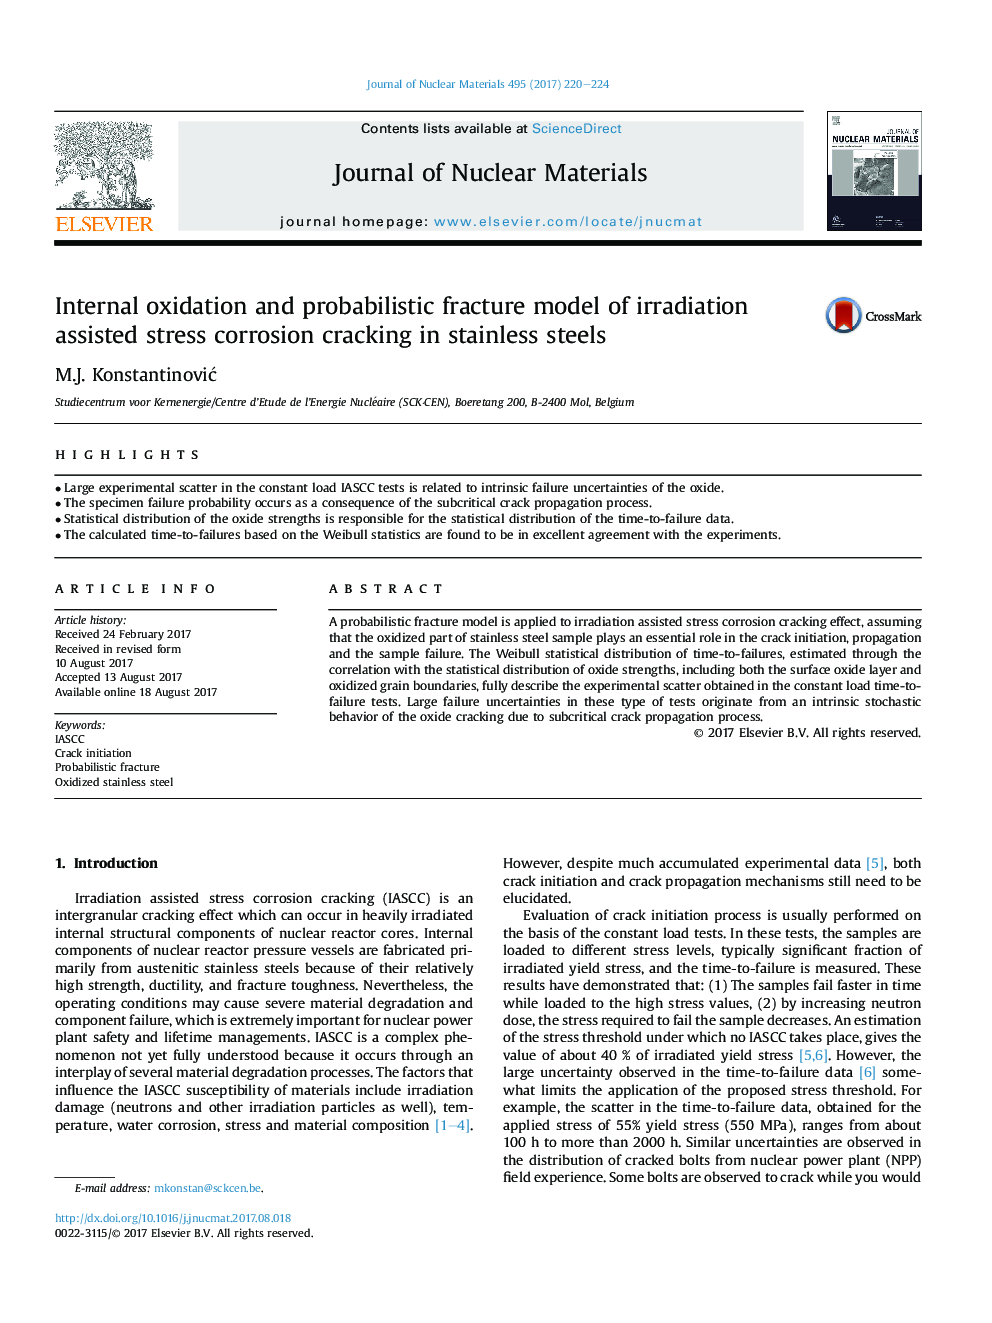 Internal oxidation and probabilistic fracture model of irradiation assisted stress corrosion cracking in stainless steels